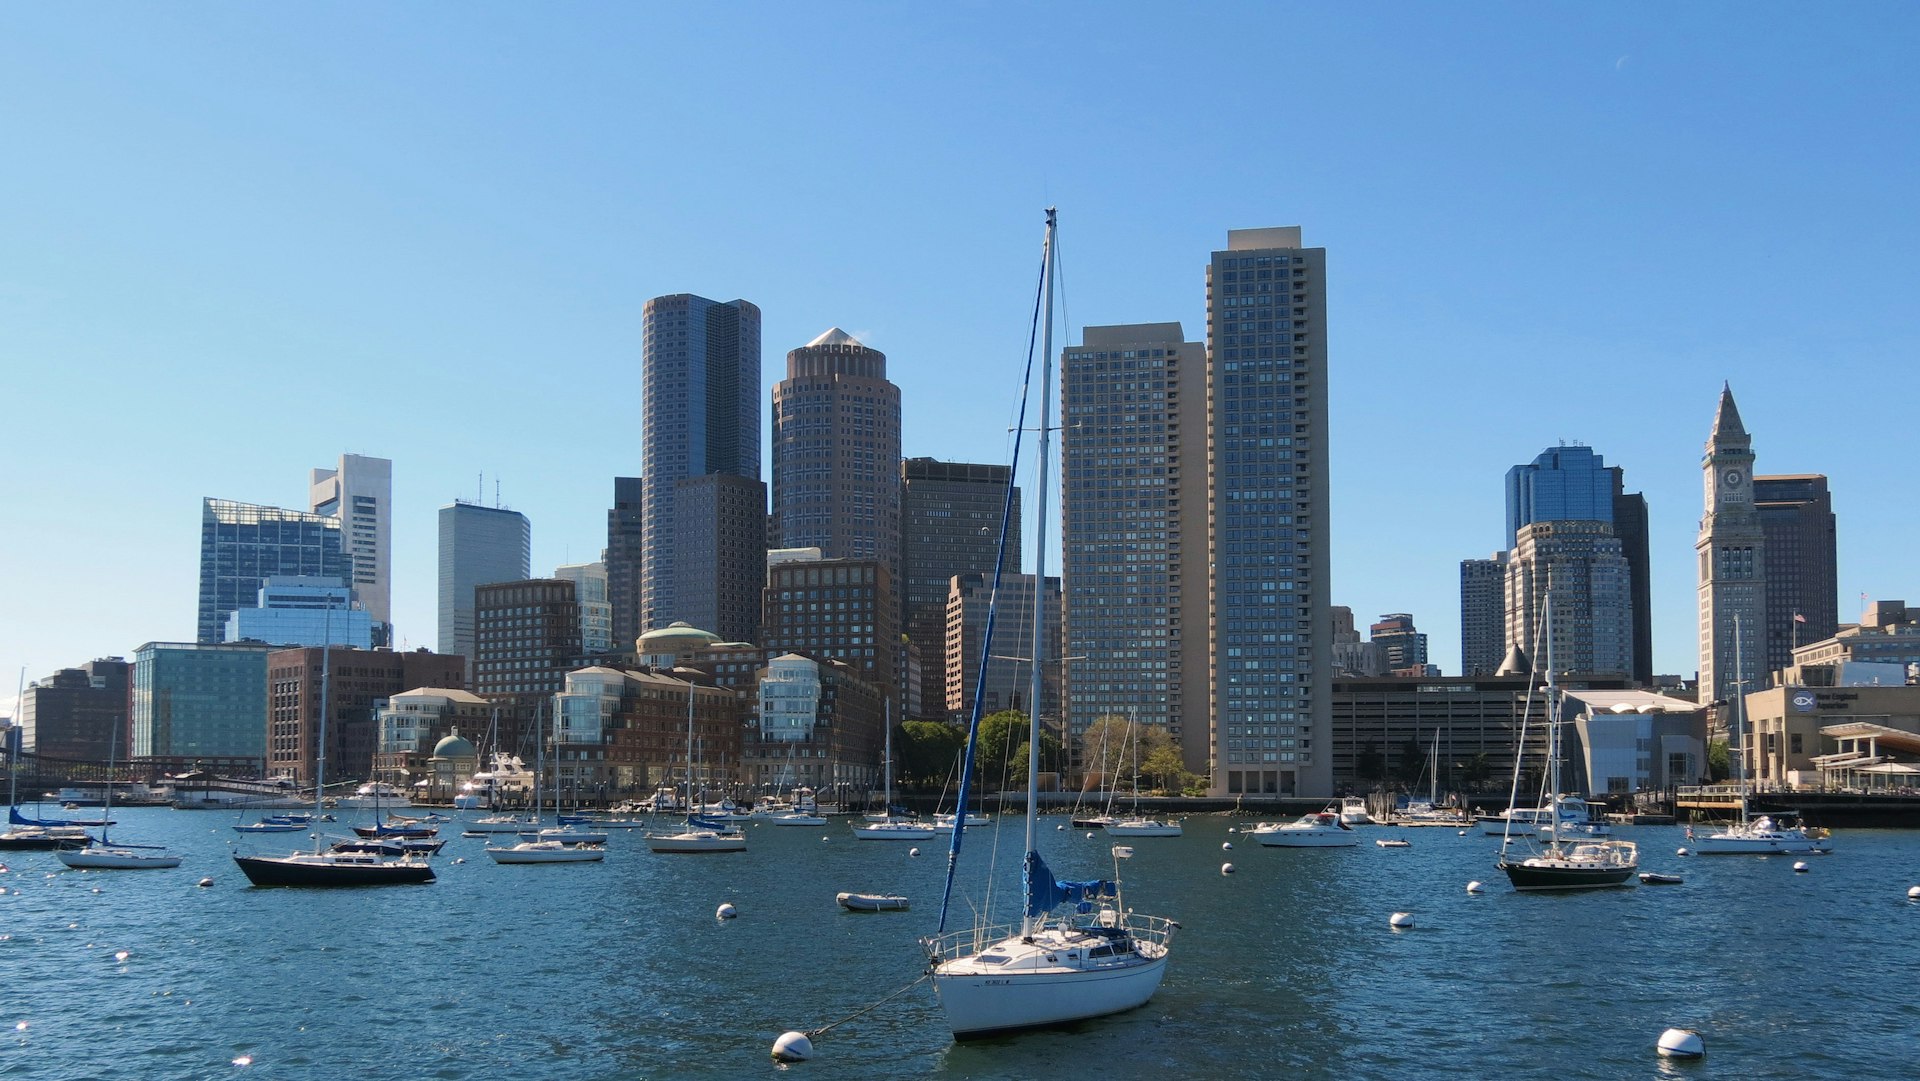 Boston from the harbor. Image by Robert Linsdell / CC BY 2.0